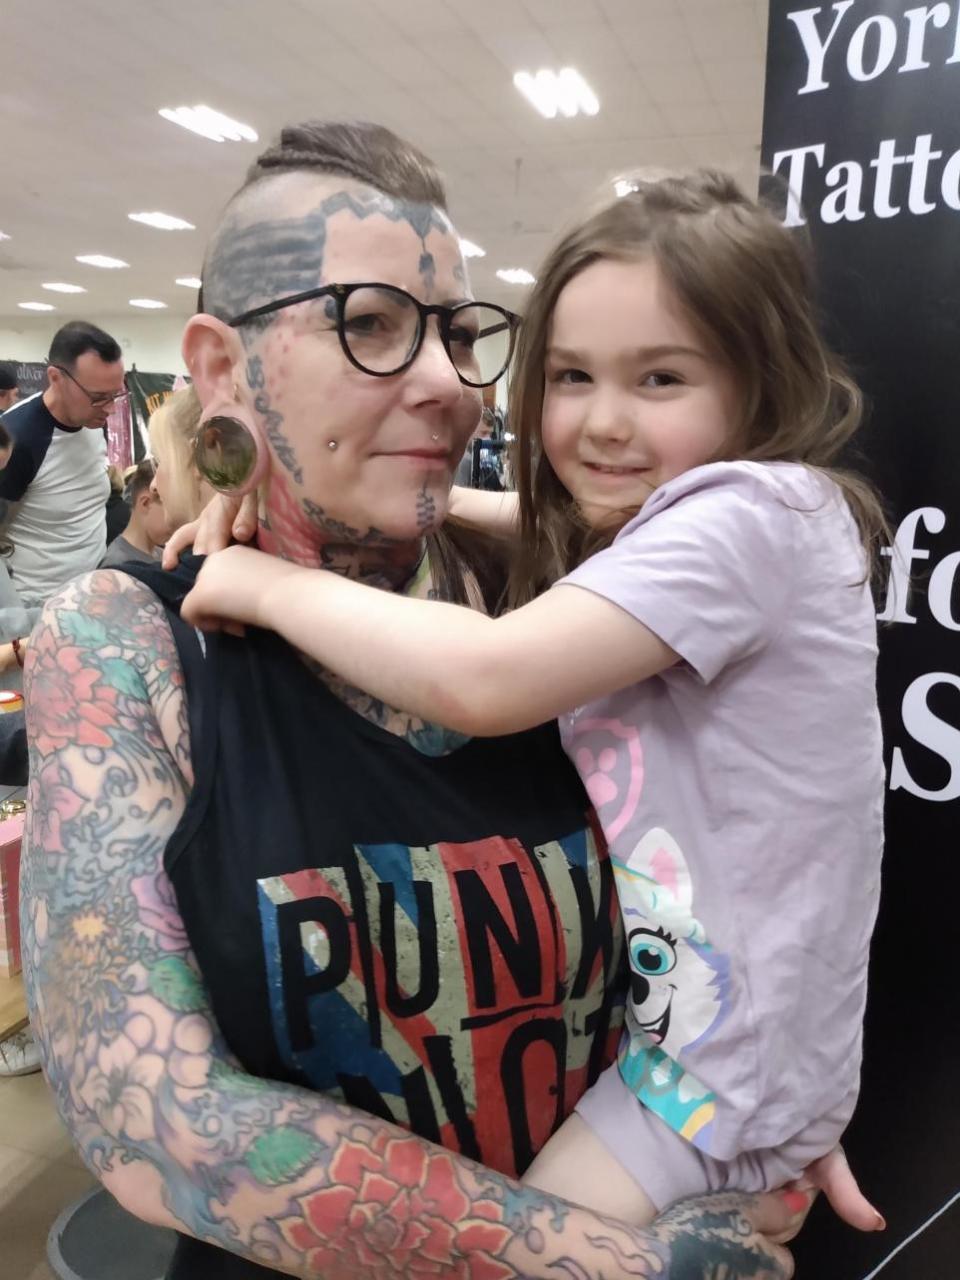 York Press: Convention organiser and tattooist Pam Green with her granddaughter Willow